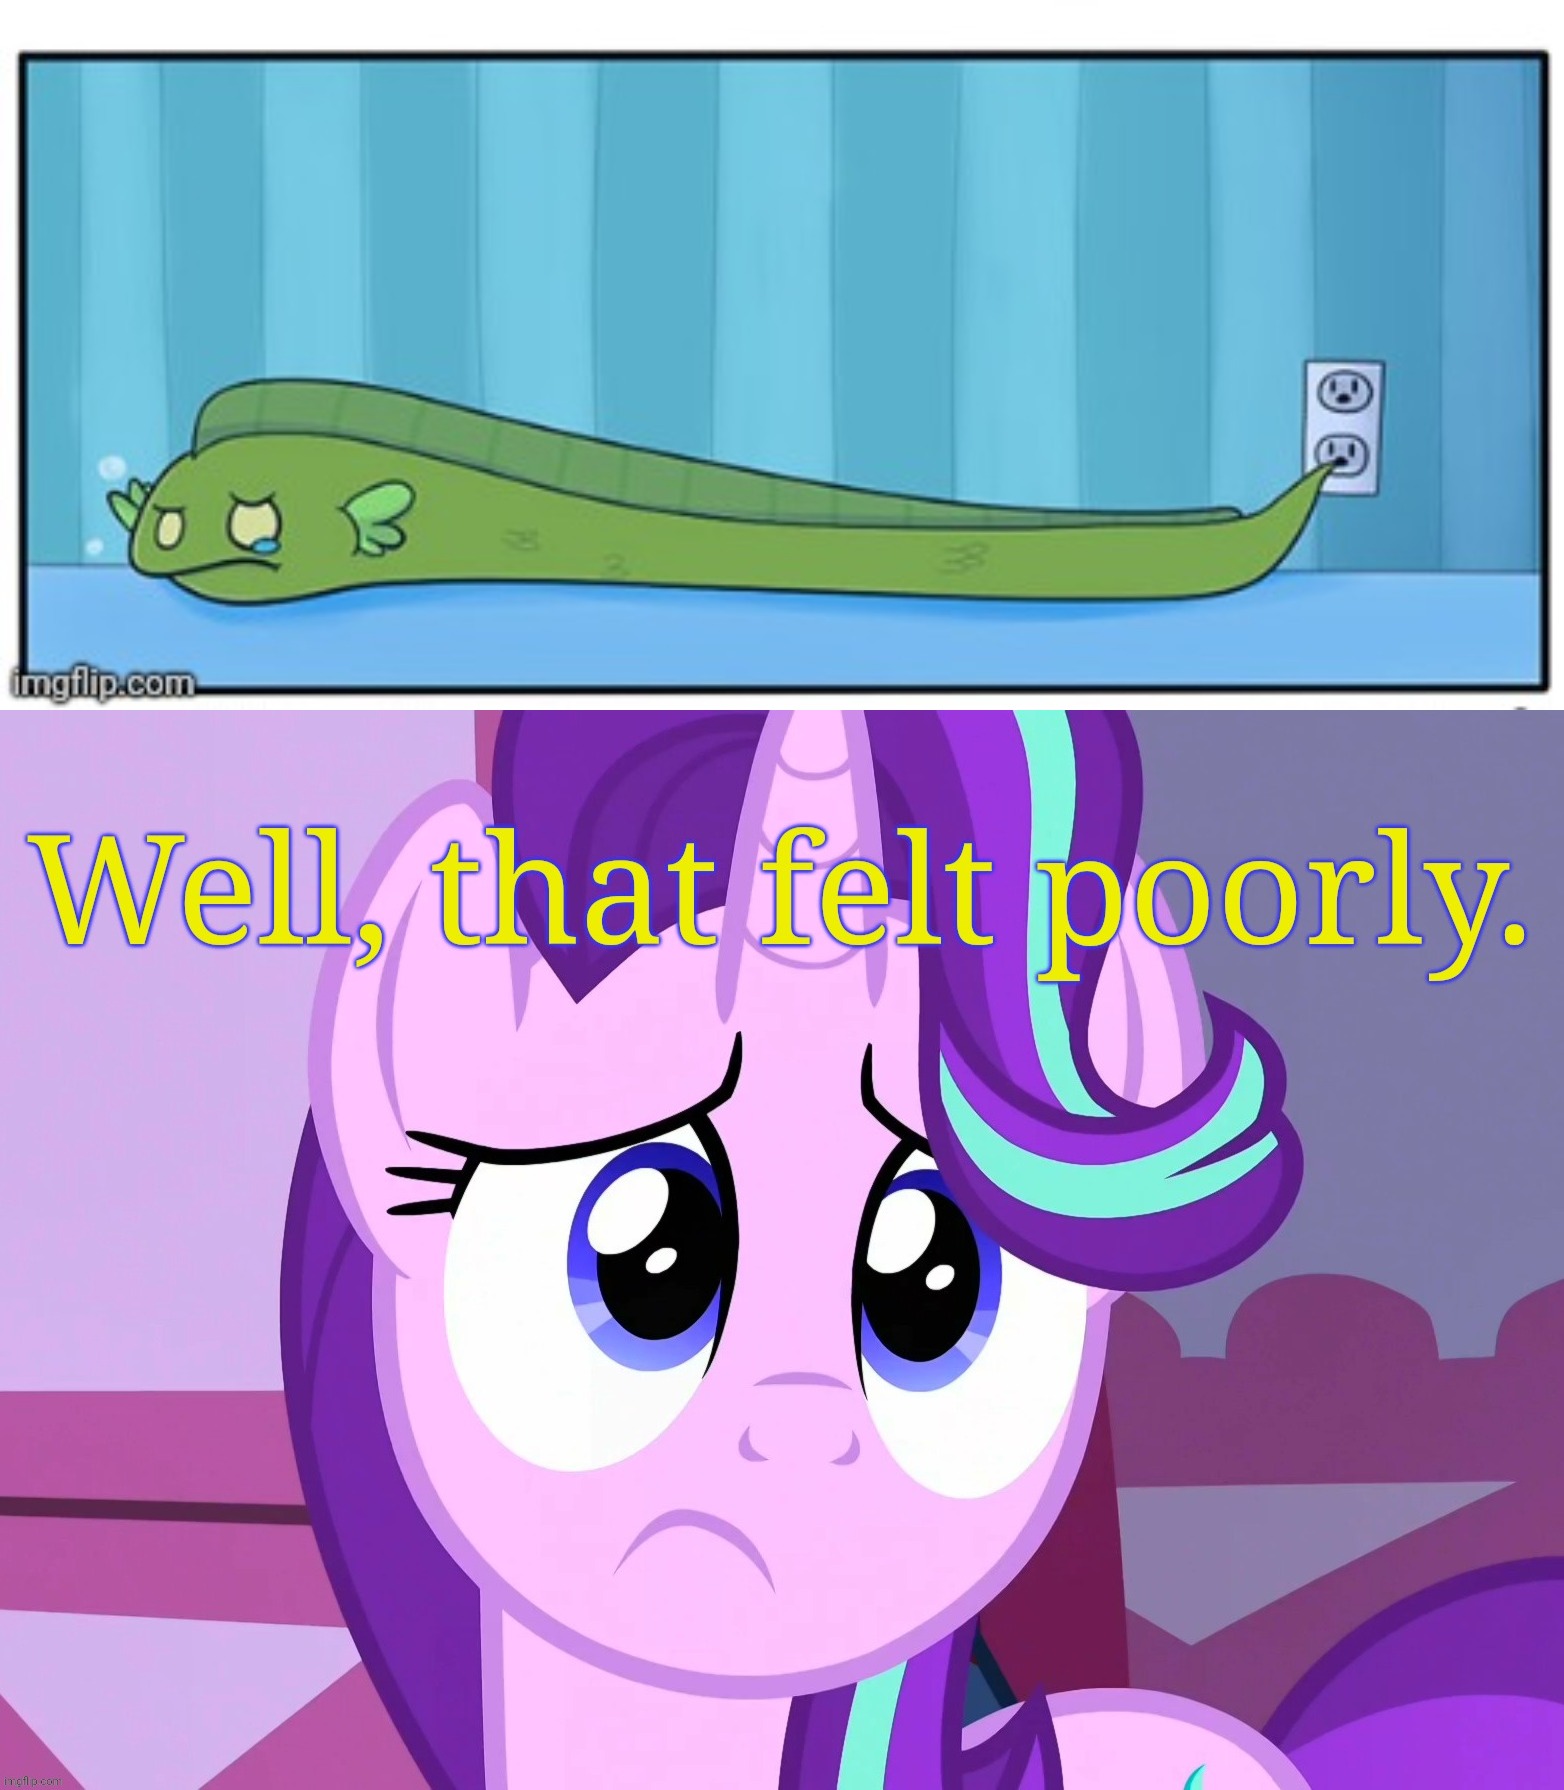 Sad eel | image tagged in comics/cartoons,animals,sadlight glimmer mlp,comments | made w/ Imgflip meme maker